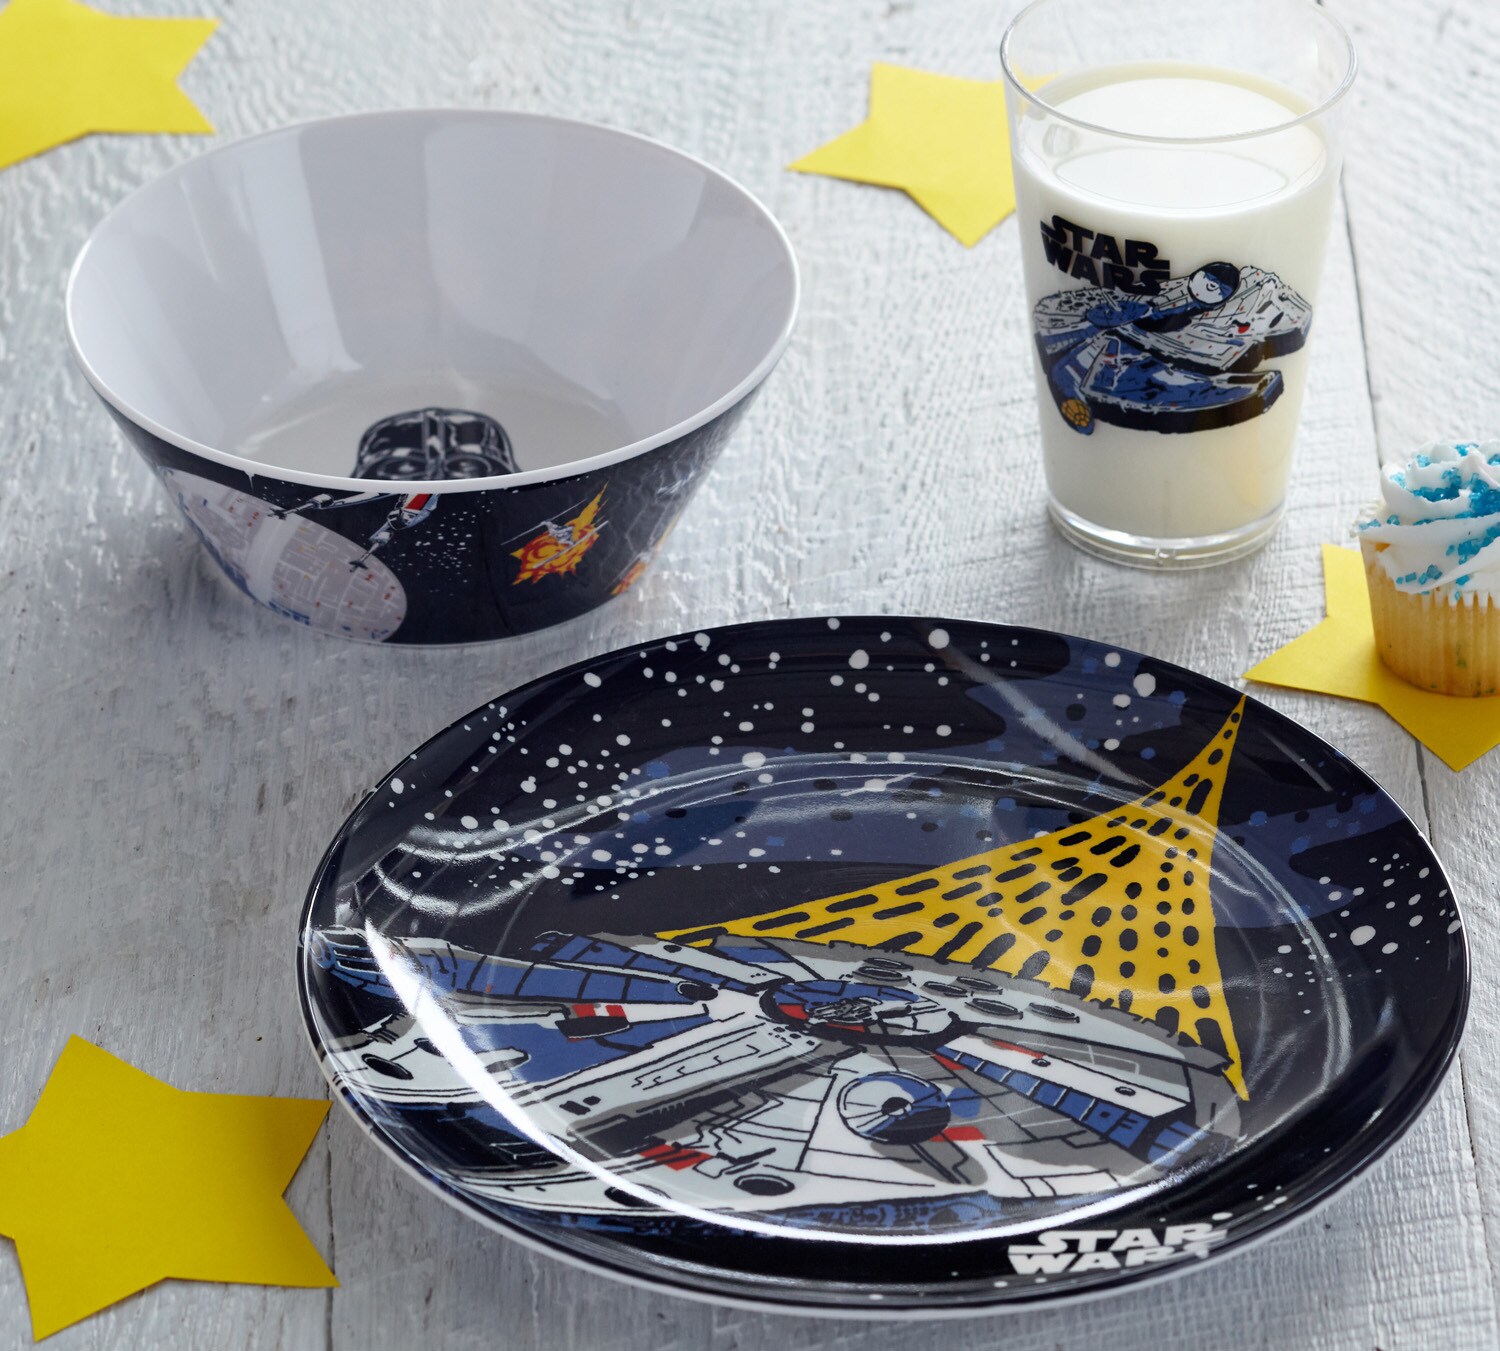 Pottery Barn Star Wars Collection - Preview! | StarWars.com